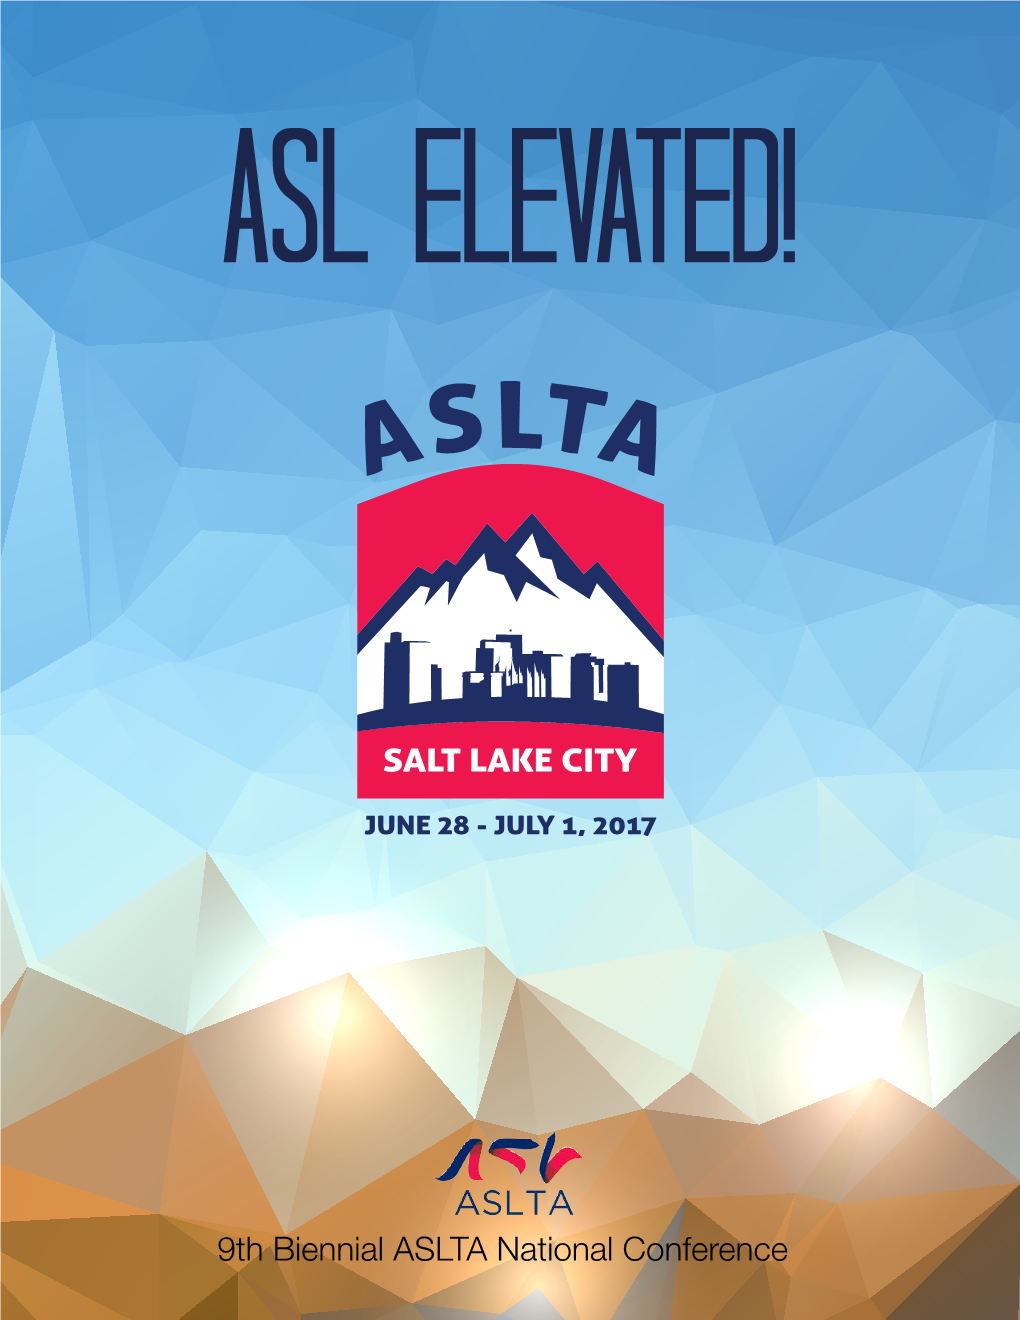 9Th Biennial ASLTA National Conference We Welcome You—Prominent Educators, Linguists, and ASL Professionals from All Over Utah and the United States to the Conference